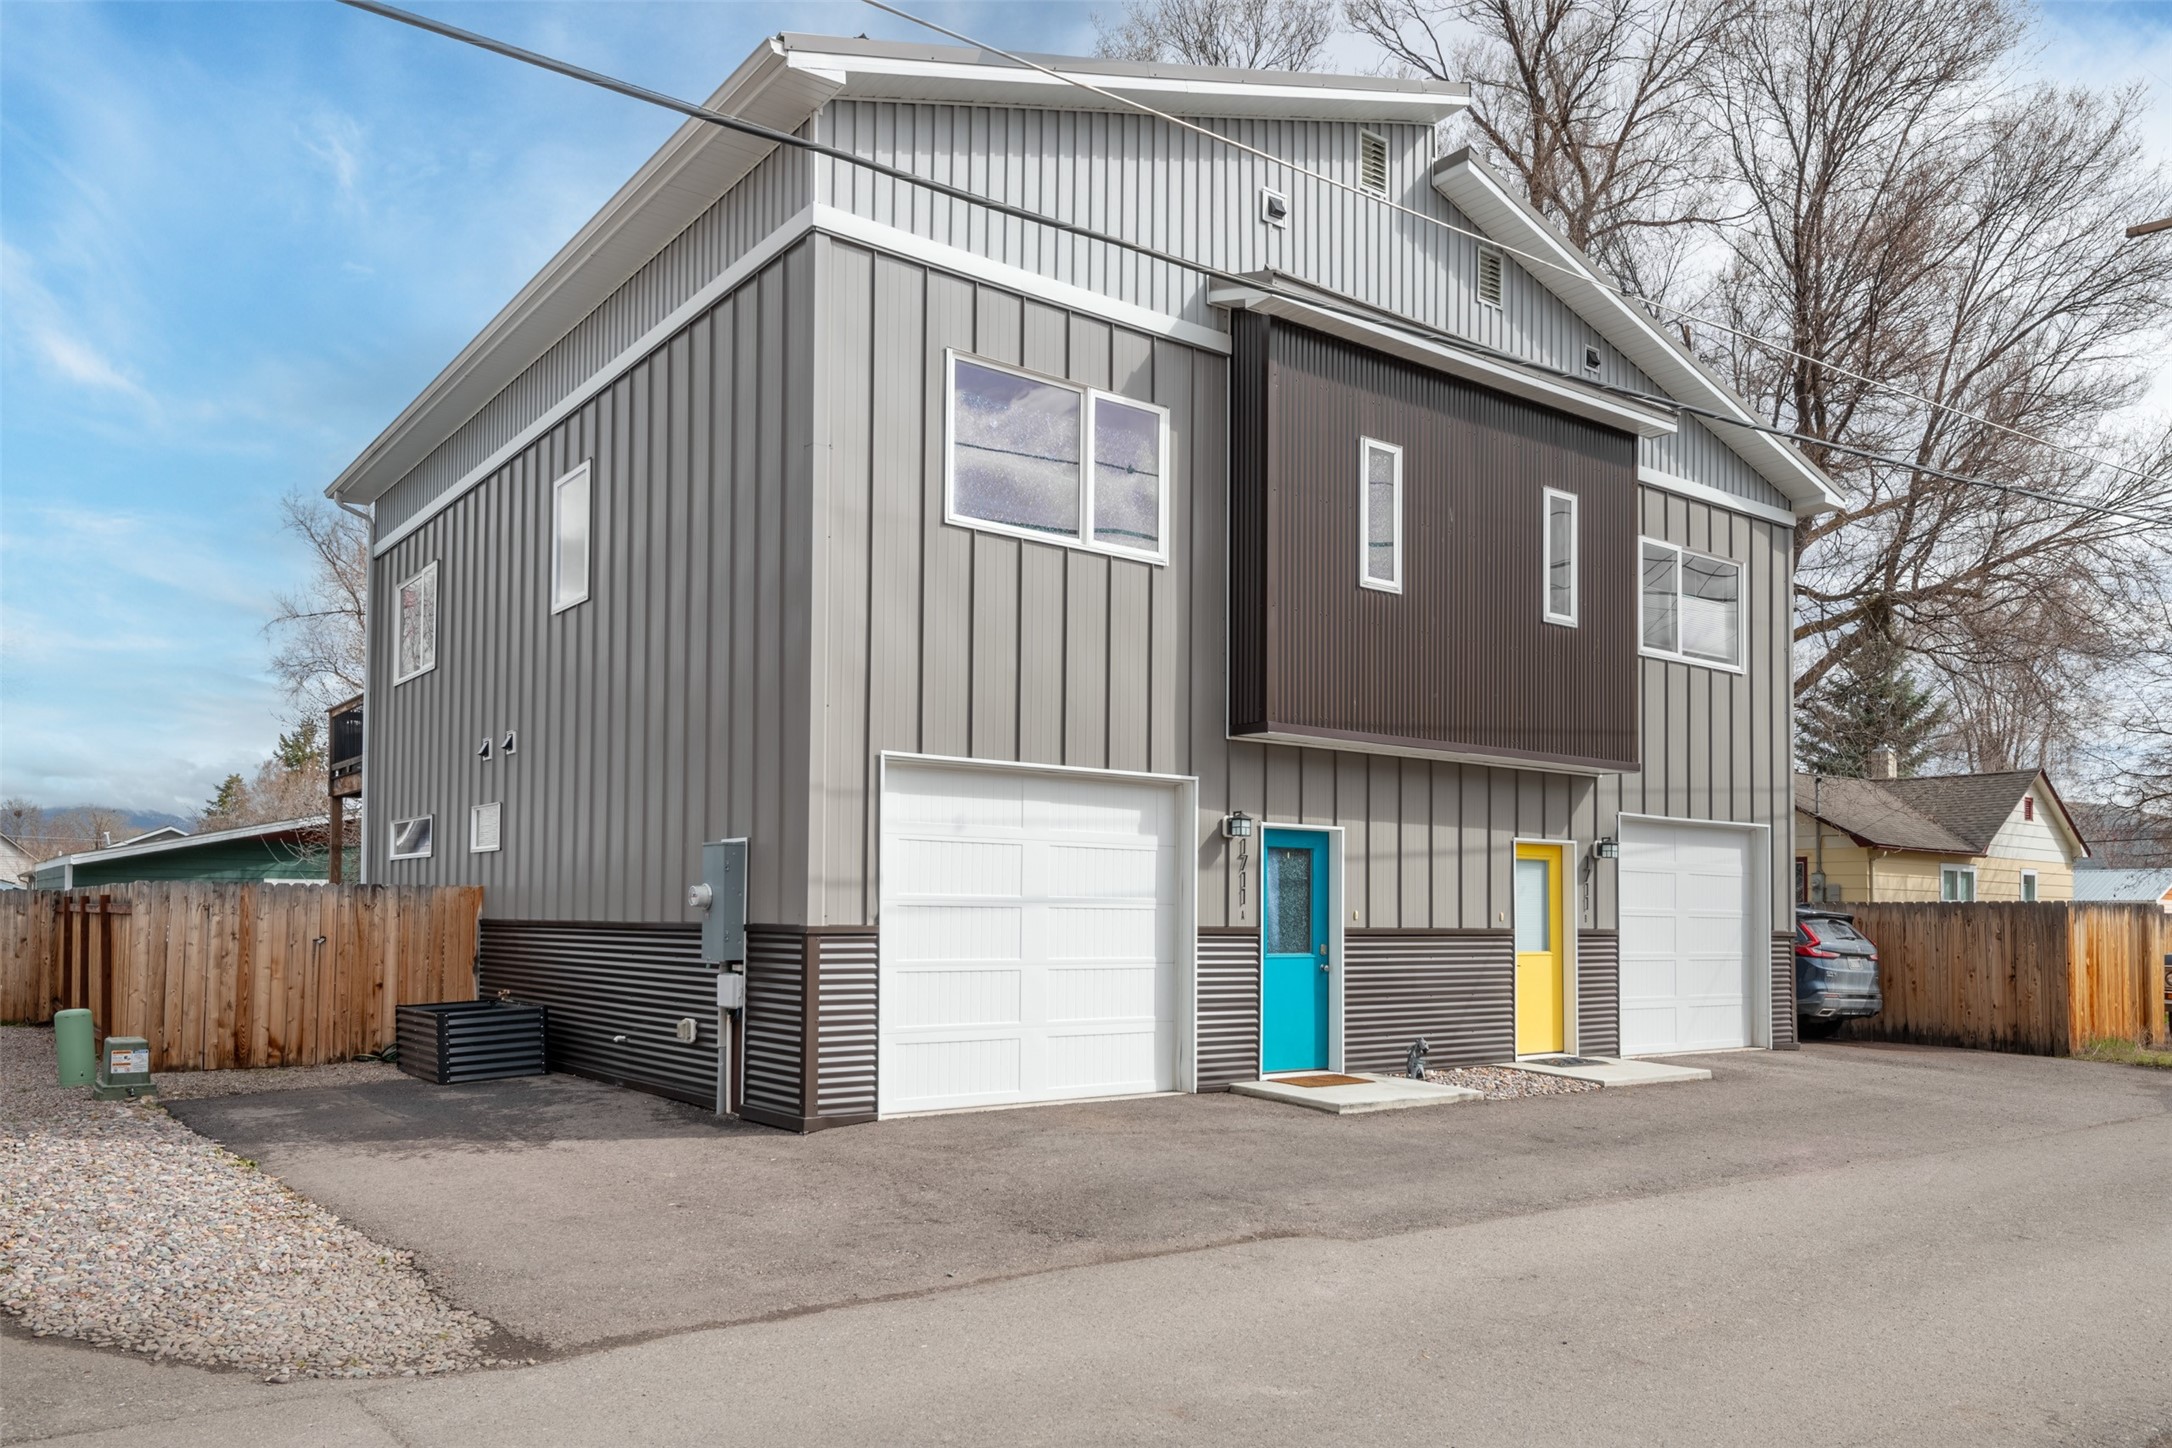 NOW OFFERING $5000 BUYER CLOSING COST CREDIT IF UNDER CONTRACT BY 5/15! This 2018-built alley townhouse boasts 3 bedrooms, 2 full bathrooms, an upper level deck, and a small fenced yard, offering the perfect blend of comfort and ease. Features include lofty 10-ft ceilings, a large main-level primary suite, plus 2 bedrooms and a full bathroom upstairs. The open-concept kitchen boasts quartz counters, tile backsplash, stainless steel appliances, and mountain views. Enjoy sunny days grilling & relaxing on your 2nd floor balcony & make use of the small fenced yard for pets or gardening. With light covenants, no HOA dues, short-term rentals permitted, all electric appliances, mini split-based HVAC, and low-maintenance metal roof/siding, this home offers hassle-free living. The deep 1-car garage provides room for your car and all your gear. Located in the vibrant Franklin to the Fort neighborhood, with easy access to public transportation, the Milwaukee trail, downtown, and entertainment. This duplex townhome was designed by architect NC Design Studio and completed in 2018. The primary suite is large enough for a sitting area in addition to a king sized bed, and is situated to the rear of the main level, with backyard access. A laundry area with a stacked washer and dryer is tucked under the stairs on the main level. The second level living/dining/kitchen area is above the surrounding rooftops, among the greenery of the trees, giving owners privacy and views of the surrounding mountains. The one shared wall is well-insulated, as well as being along the stairway wall, and the current owners and neighbors report little to no noise transfer.